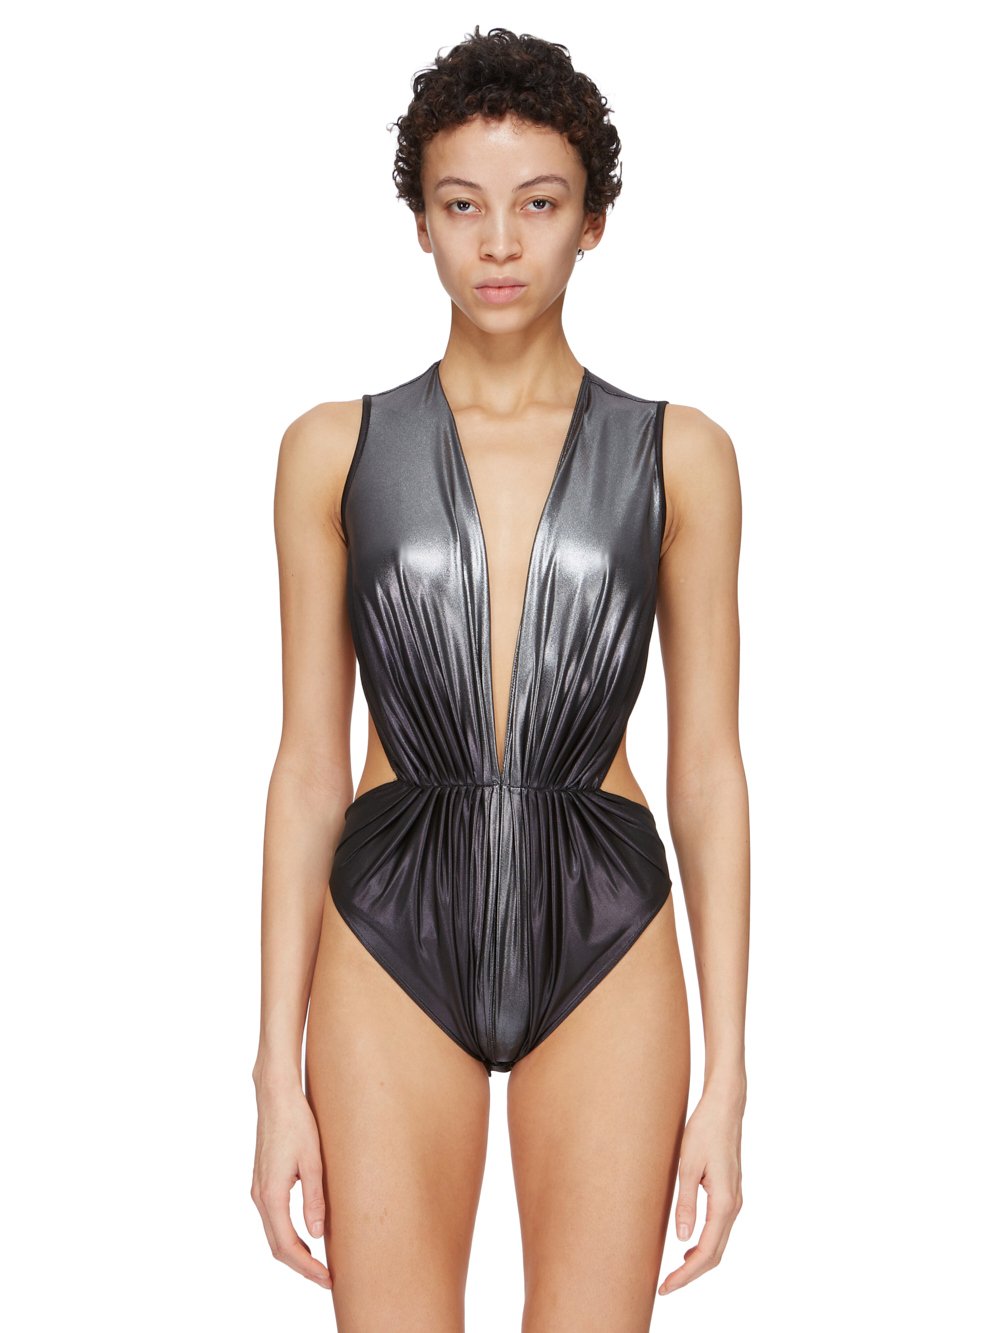 RICK OWENS LILIES FW23 LUXOR GIA BODYSUIT IN SILVER DEGRADE GLOSSY VISCOSE JERSEY